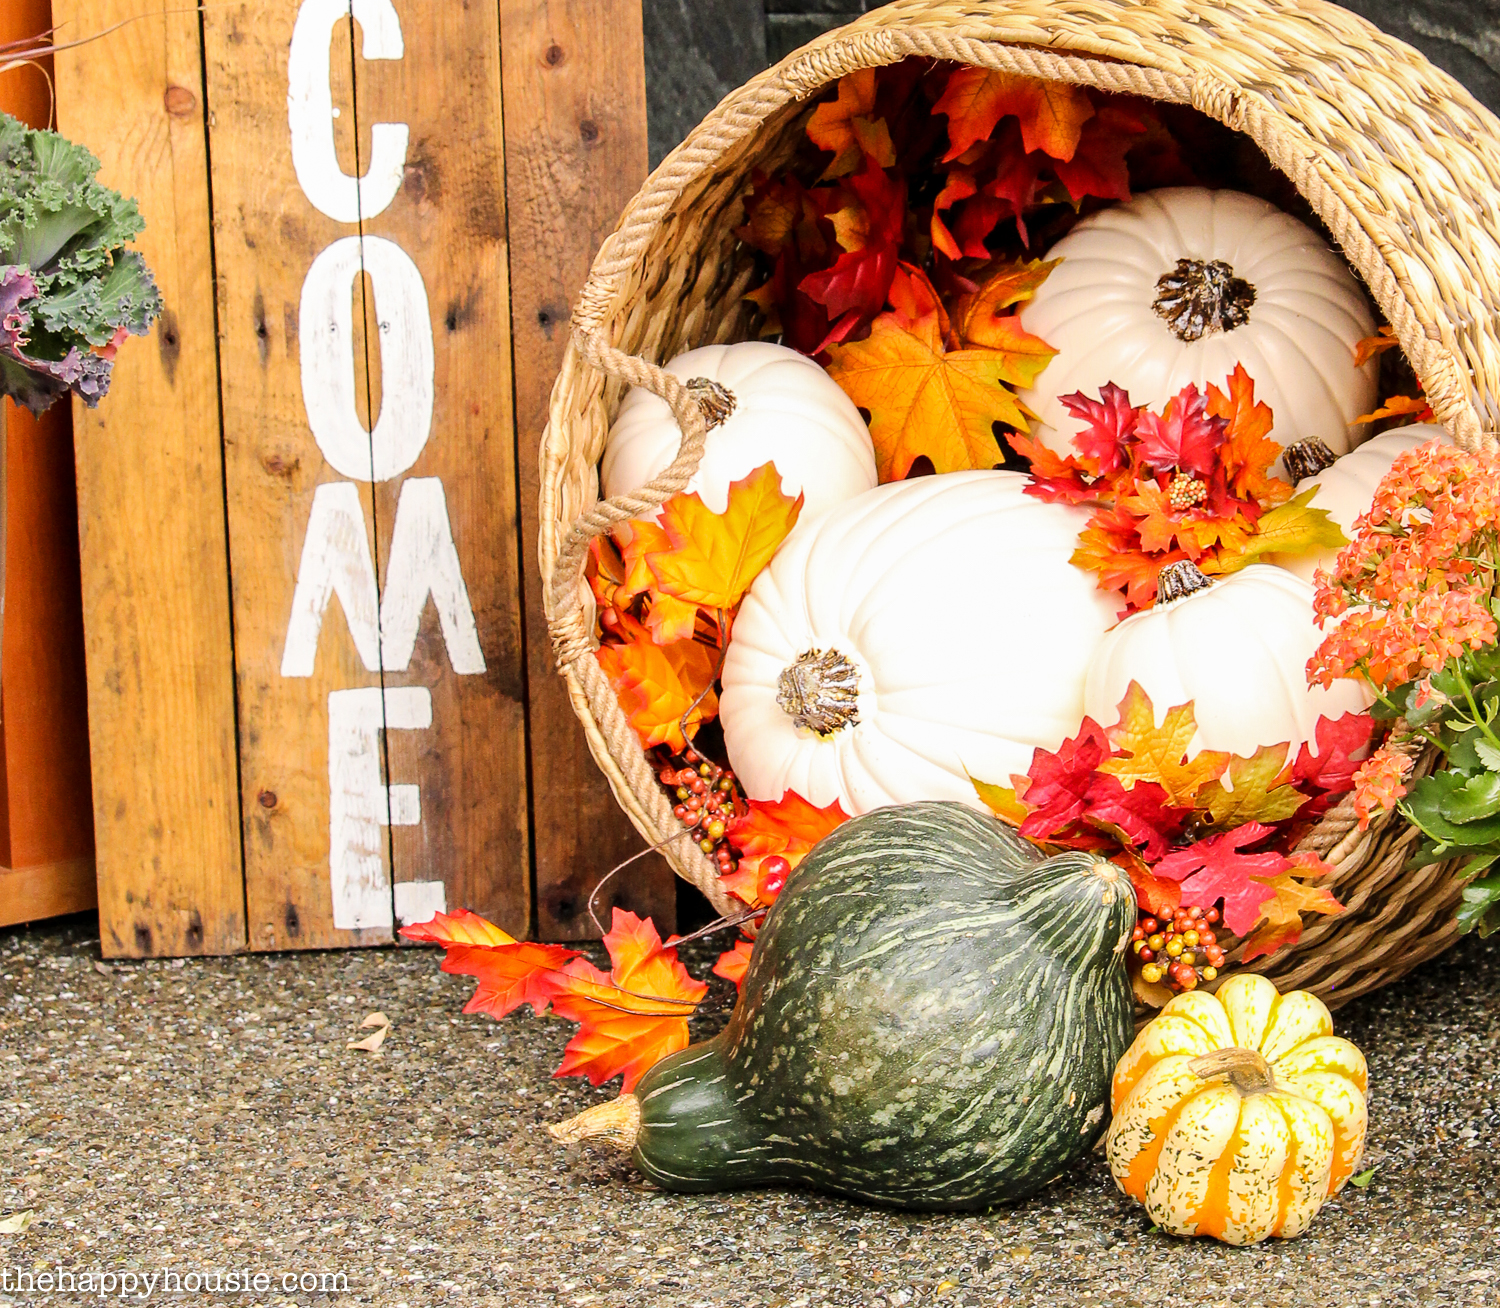 A small basket filled with fall leaves, pumpkins and gourds.